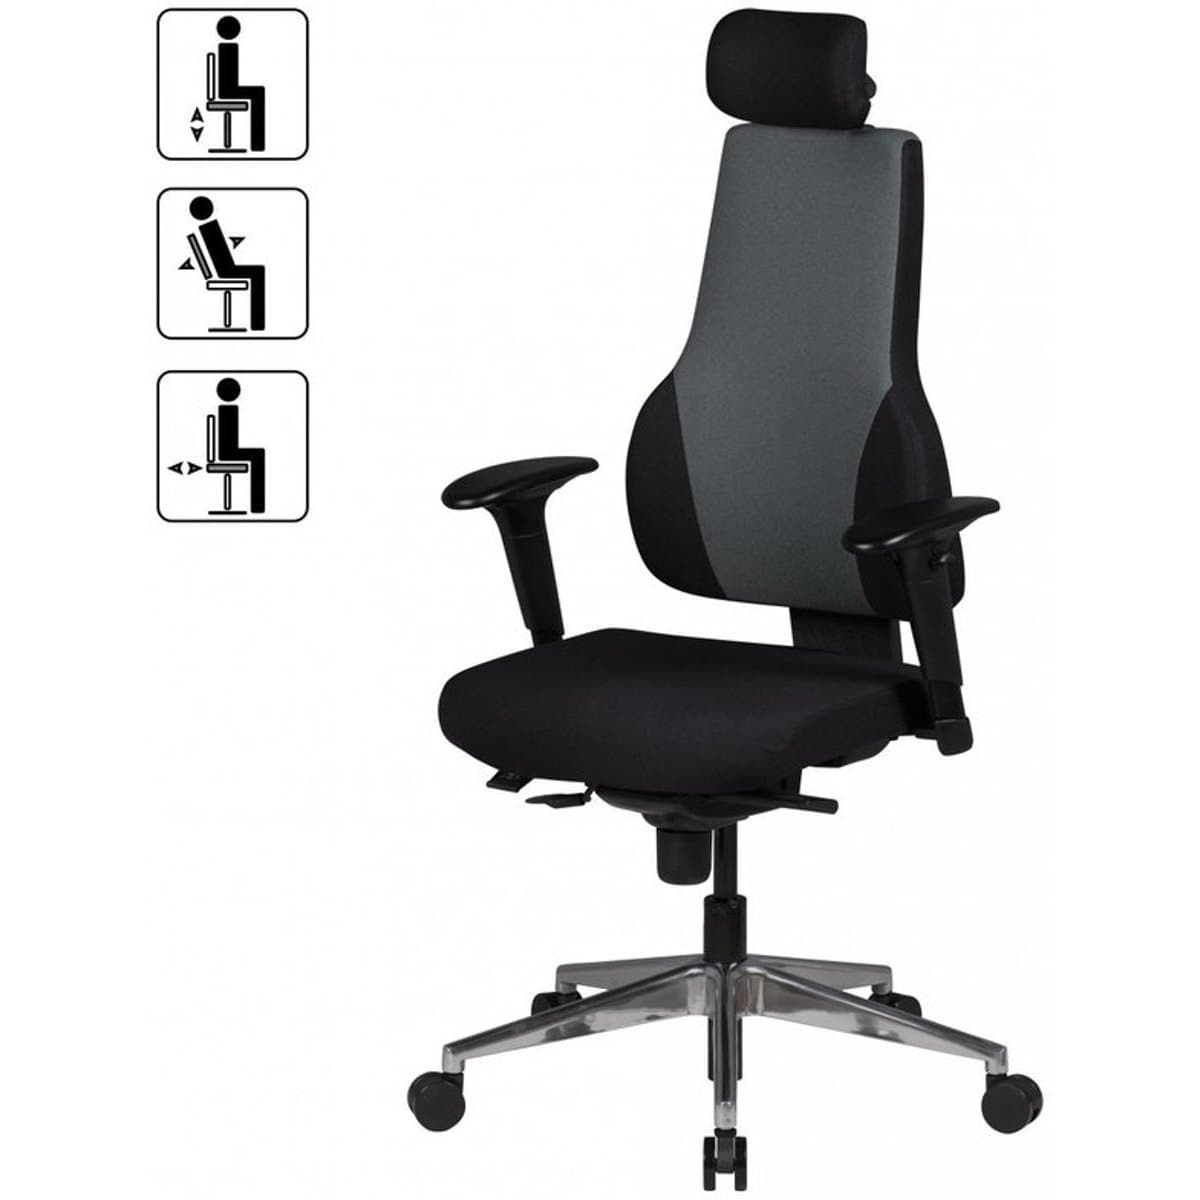 Nancy's Fieldston Office Chair - Executive Chair - Ergonomic Swivel Chair - Office Chairs for Adults - High Seating Comfort